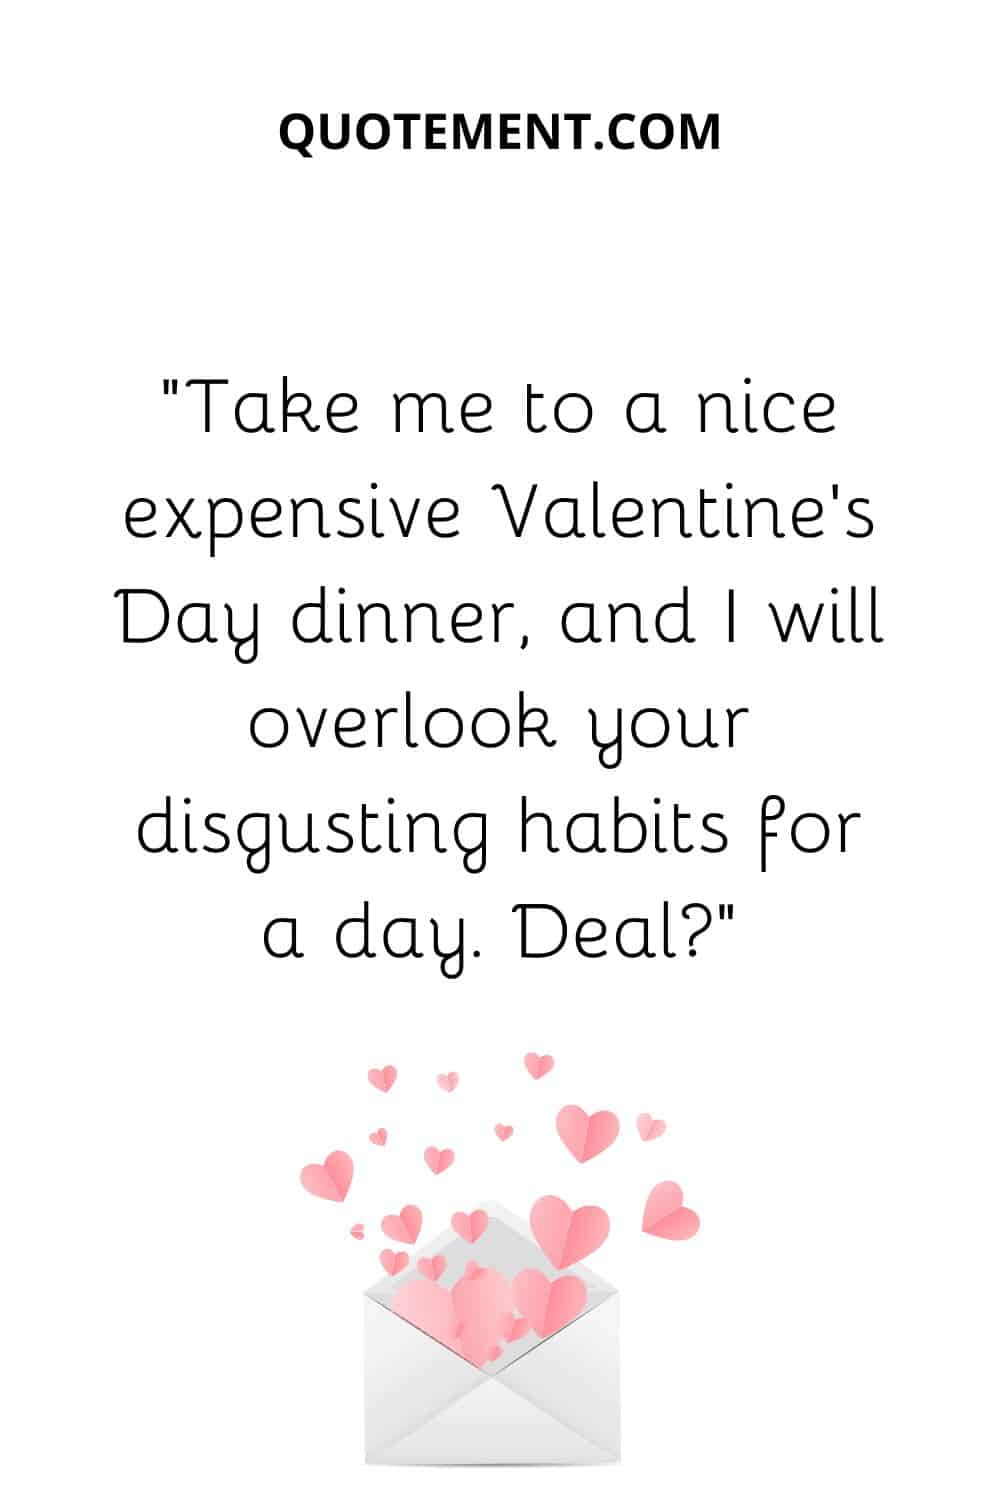 “Take me to a nice expensive Valentine’s Day dinner, and I will overlook your disgusting habits for a day. Deal”